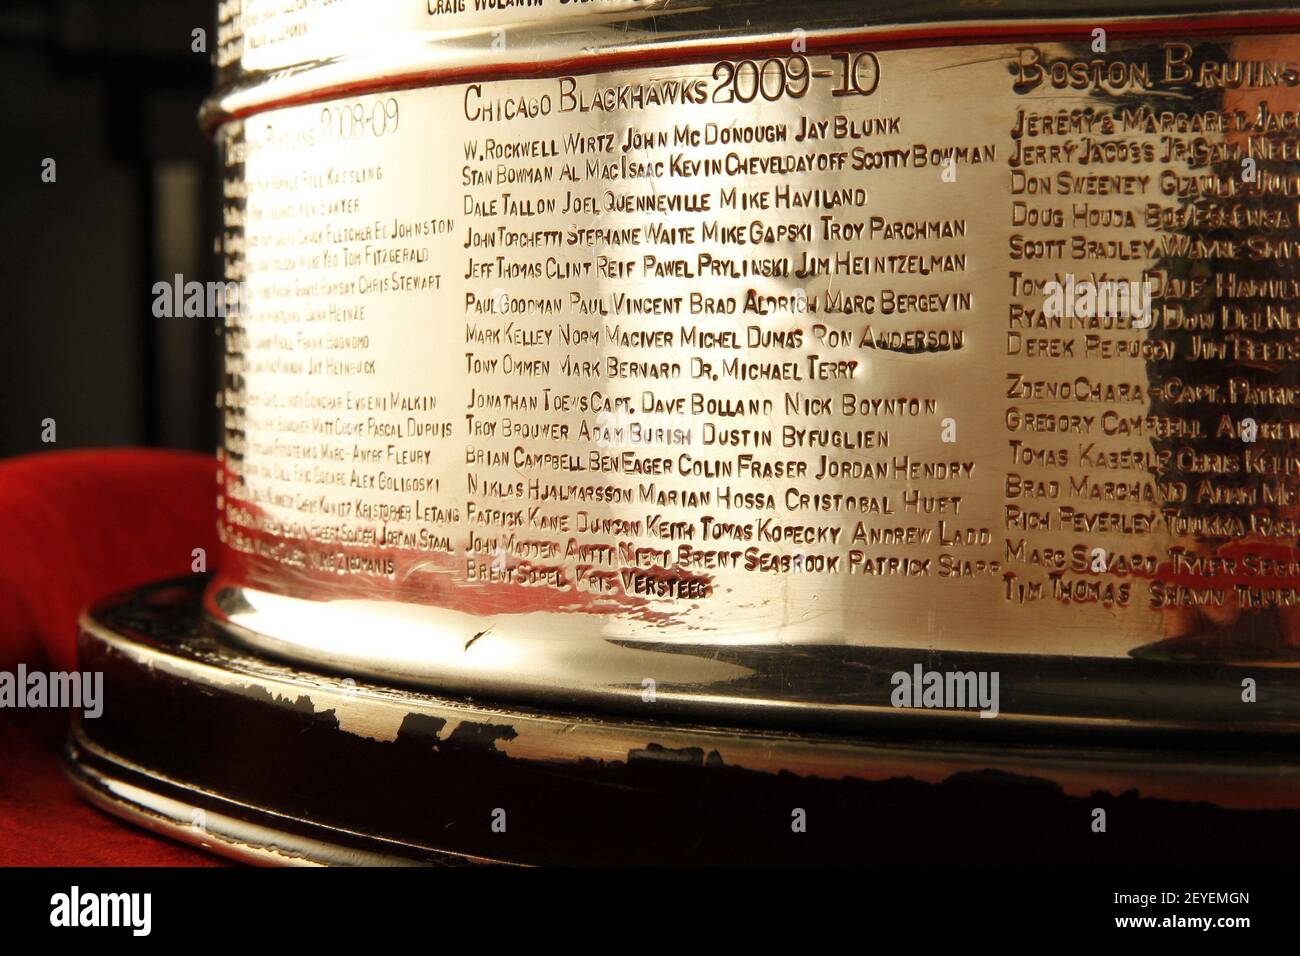 https://c8.alamy.com/comp/2EYEMGN/the-stanley-cup-on-july-8-2013-in-chicago-illinois-with-the-engraved-listing-of-the-champion-chicago-blackhawks-team-of-the-2009-10-season-in-the-24-years-since-louise-st-jacques-has-been-the-trophys-artisan-scribe-shes-added-more-than-1000-names-to-the-cup-photo-by-chris-walkerchicago-tribunemctsipa-usa-2EYEMGN.jpg